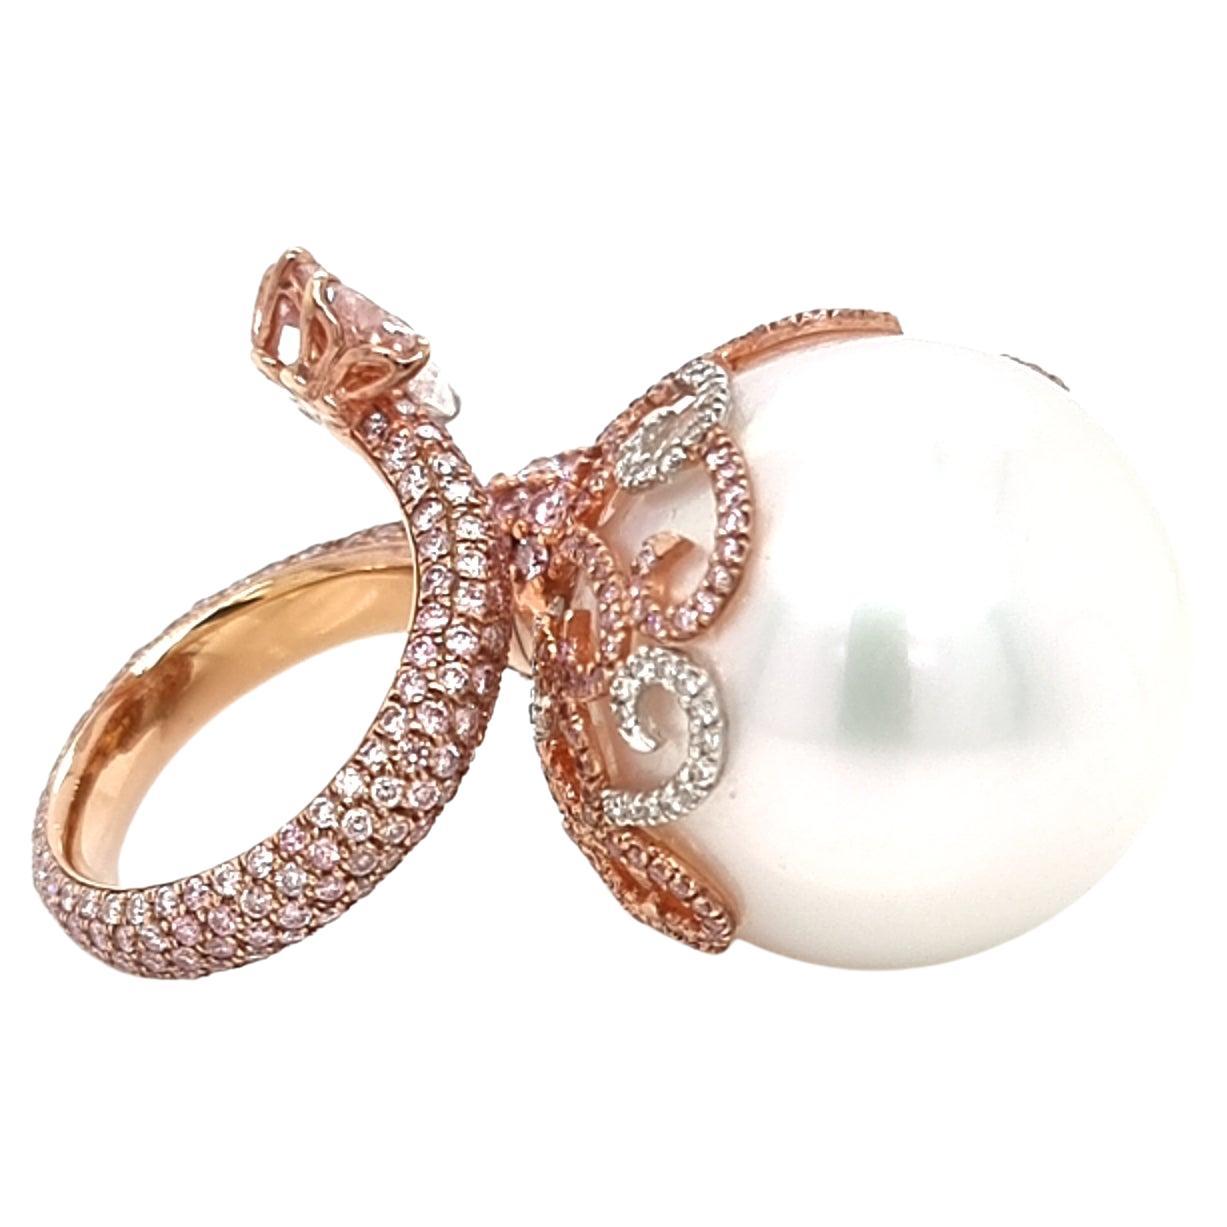 Exclusive and Unique 21 MM GIA Certified Pearl Ring with Diamonds For Sale